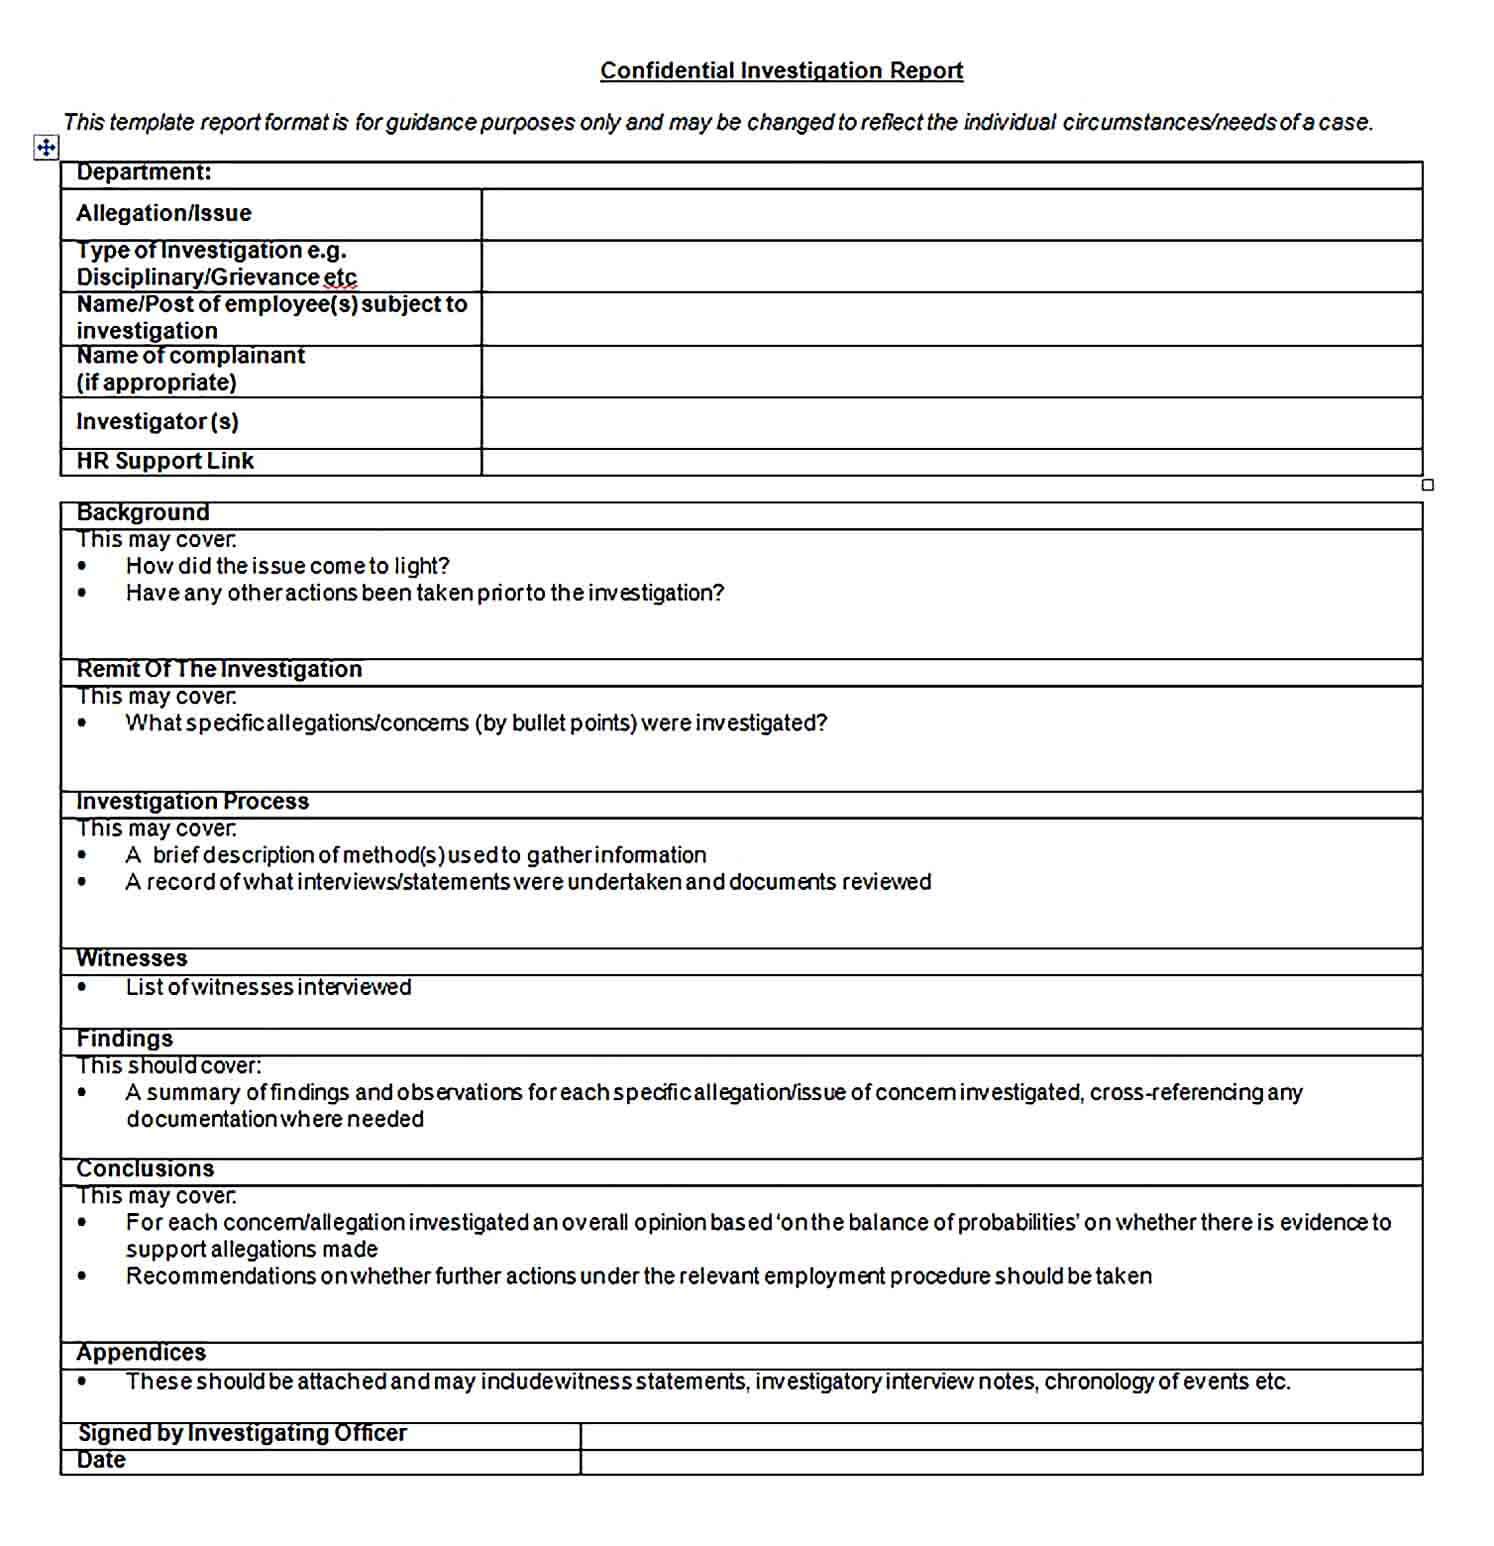 Sample Confidential Investigation Report template form